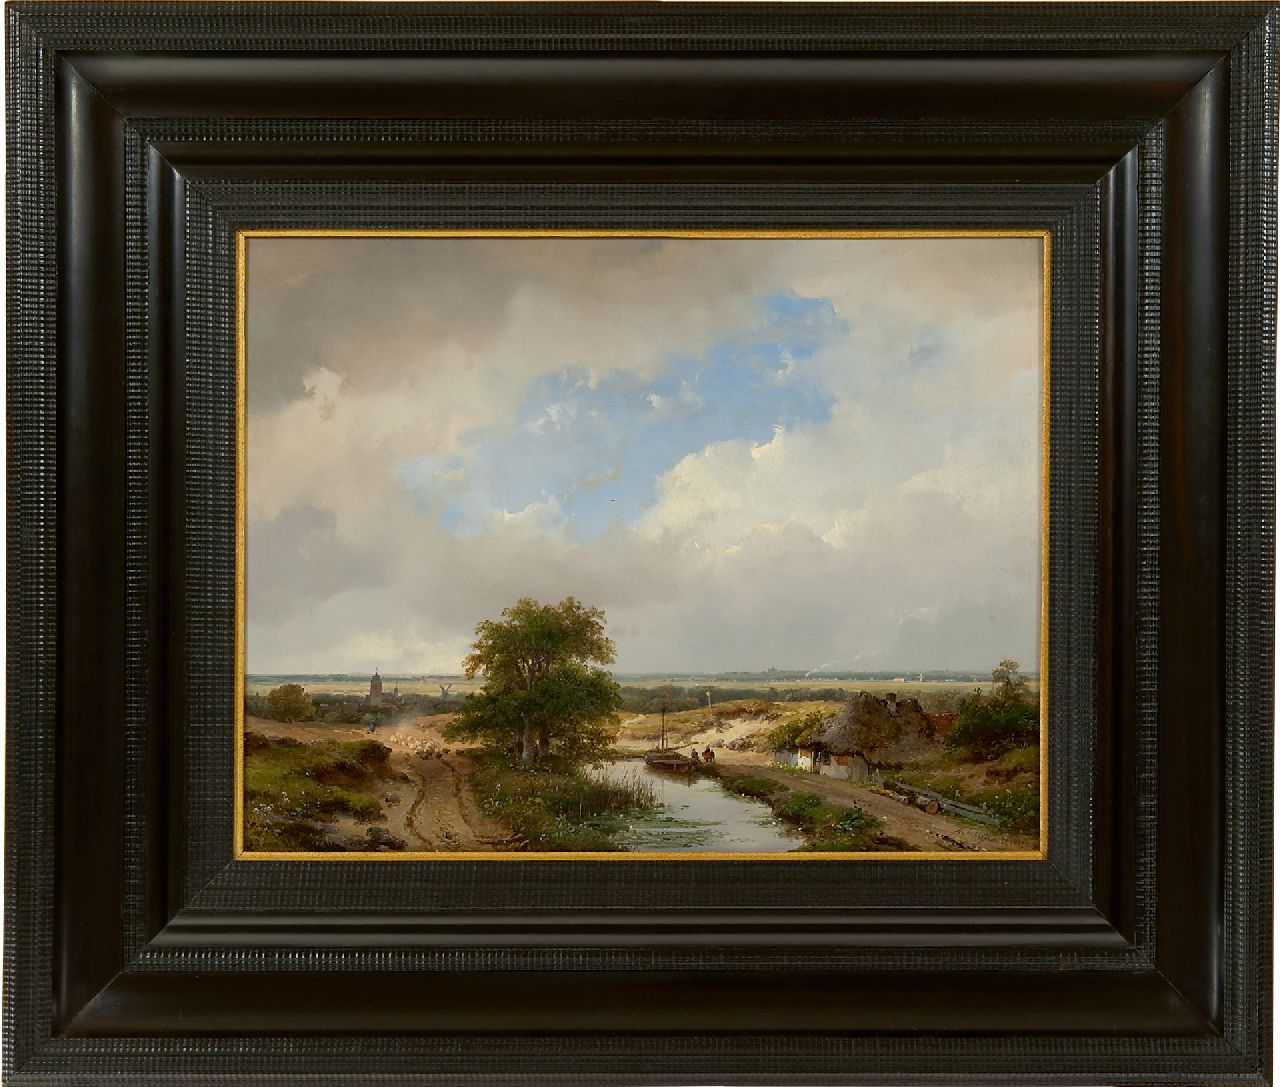 Schelfhout A.  | Andreas Schelfhout, A dune landscape with Haarlem in the distance and a steam train, oil on panel 31.6 x 41.1 cm, signed l.r. and painted 1847